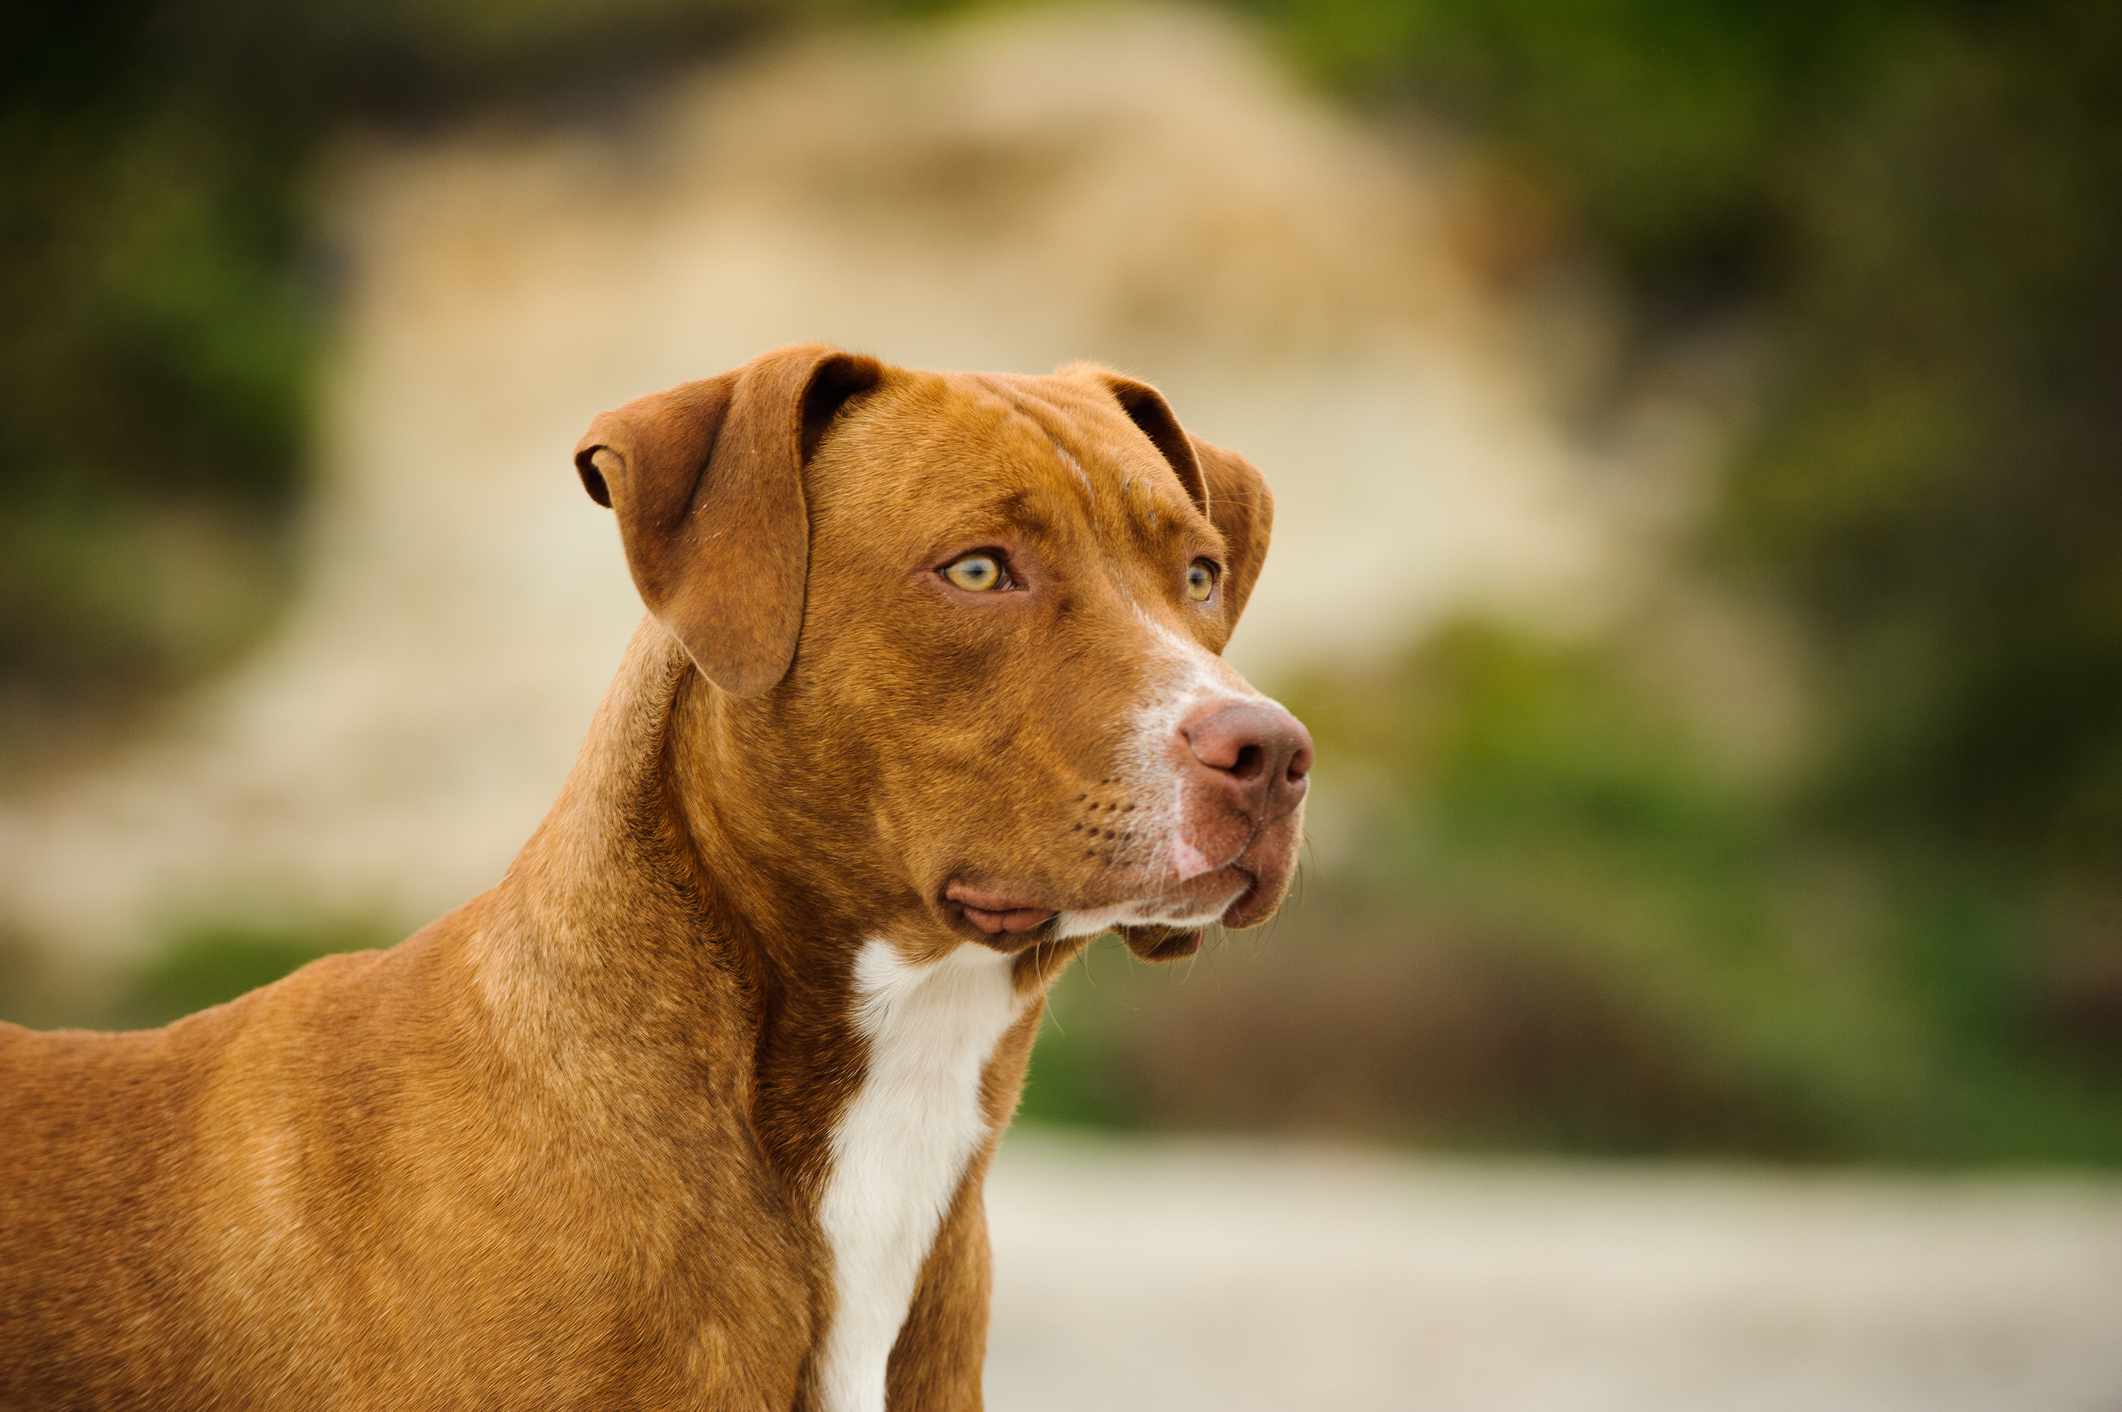 American Pitbull Terrier head shot against blurred outdoor background